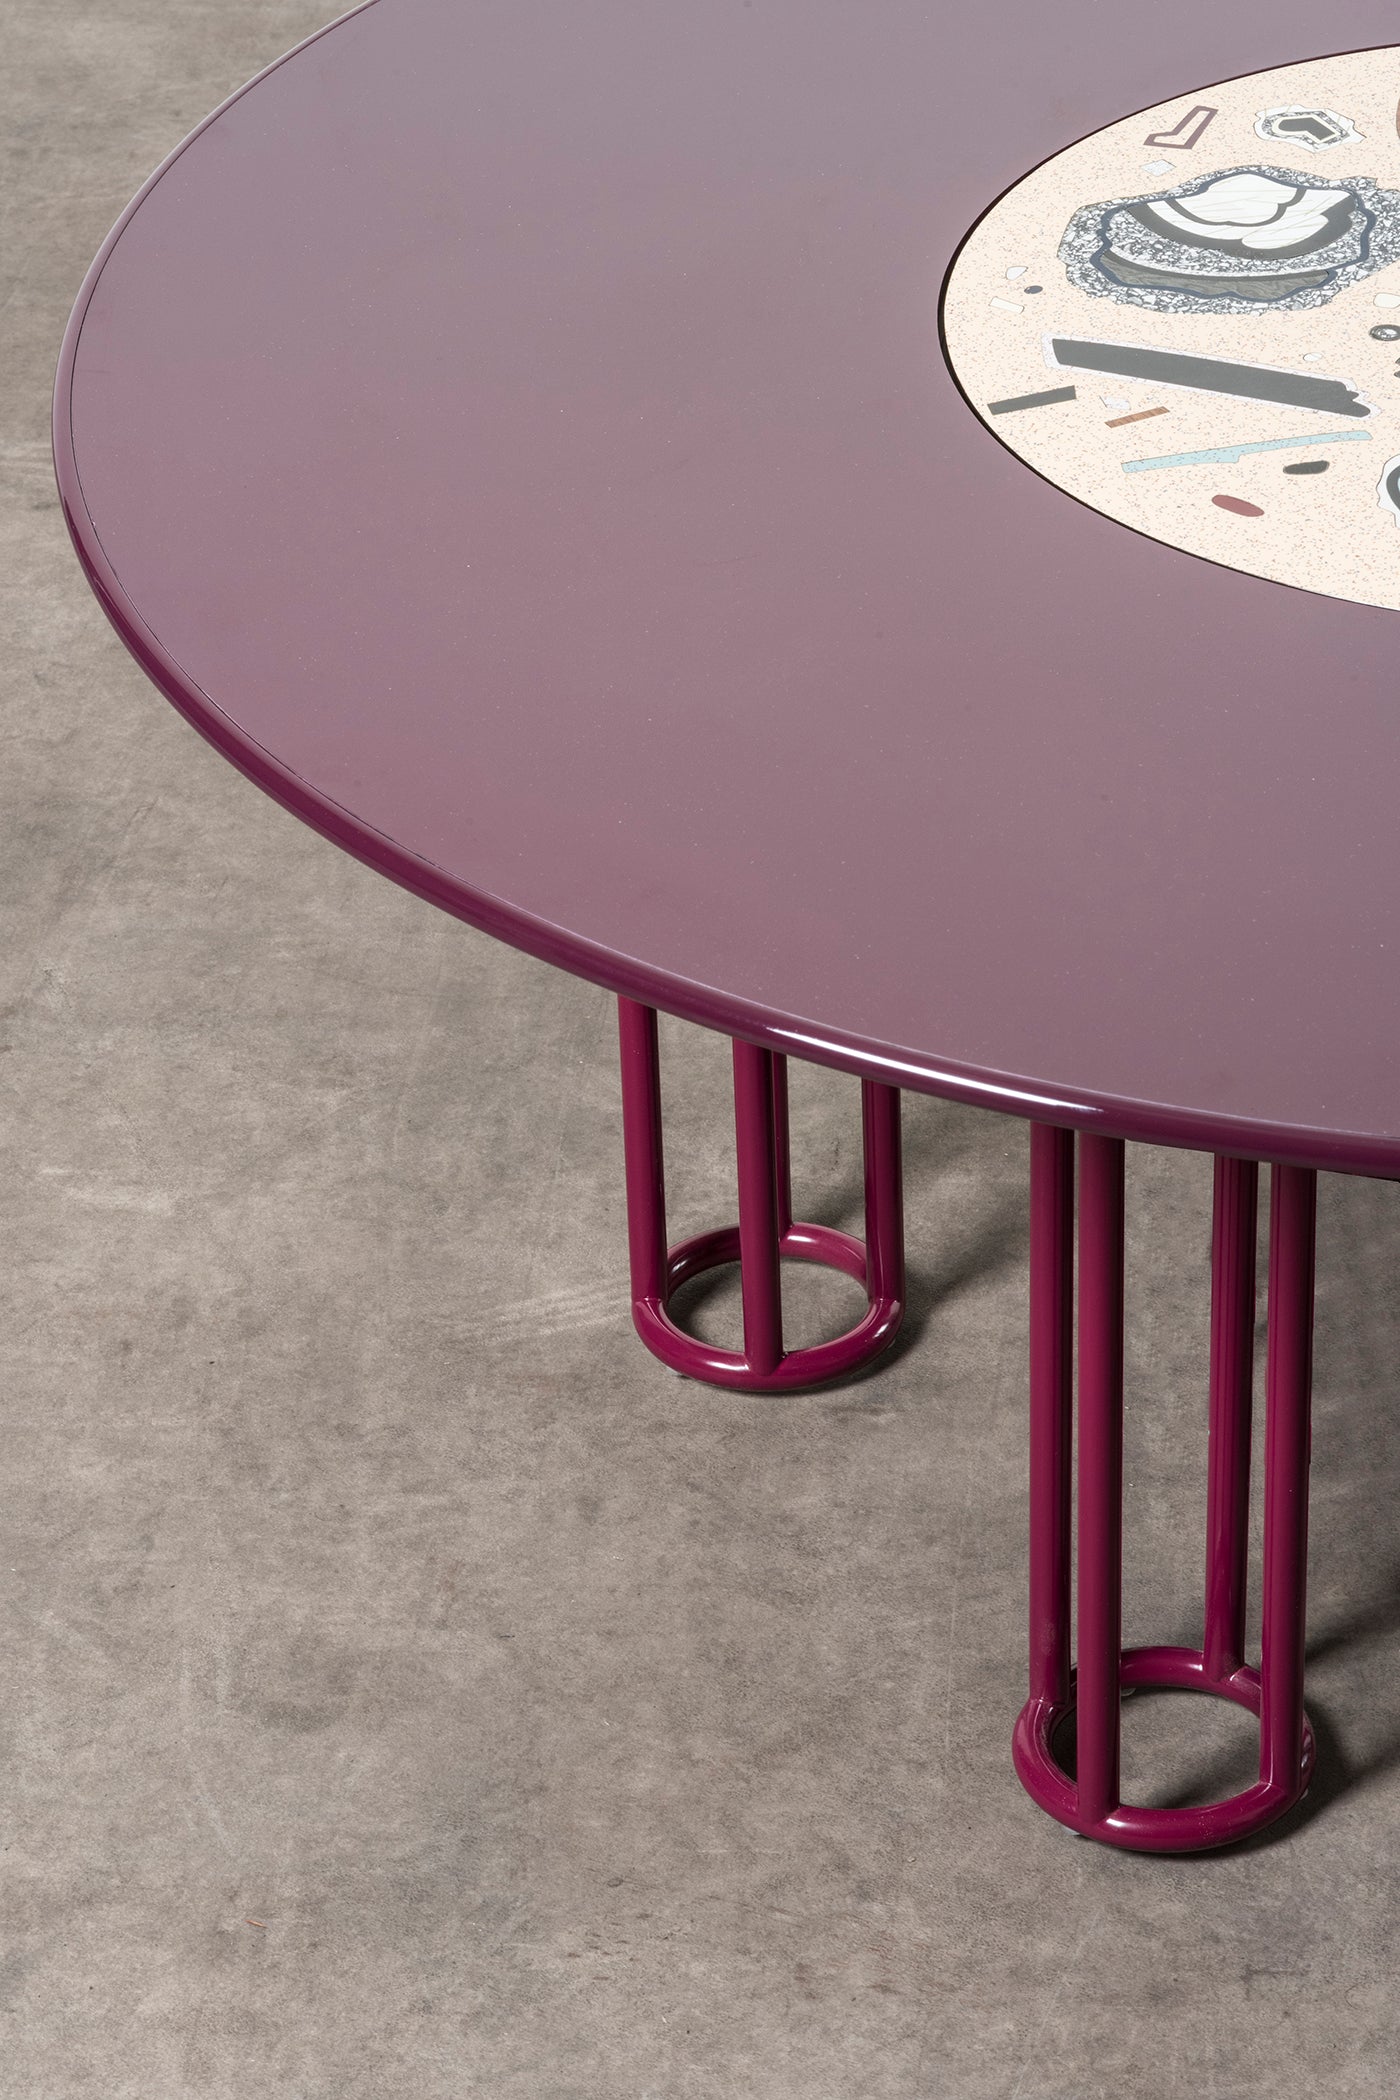 Low dining table with Lazy Susan